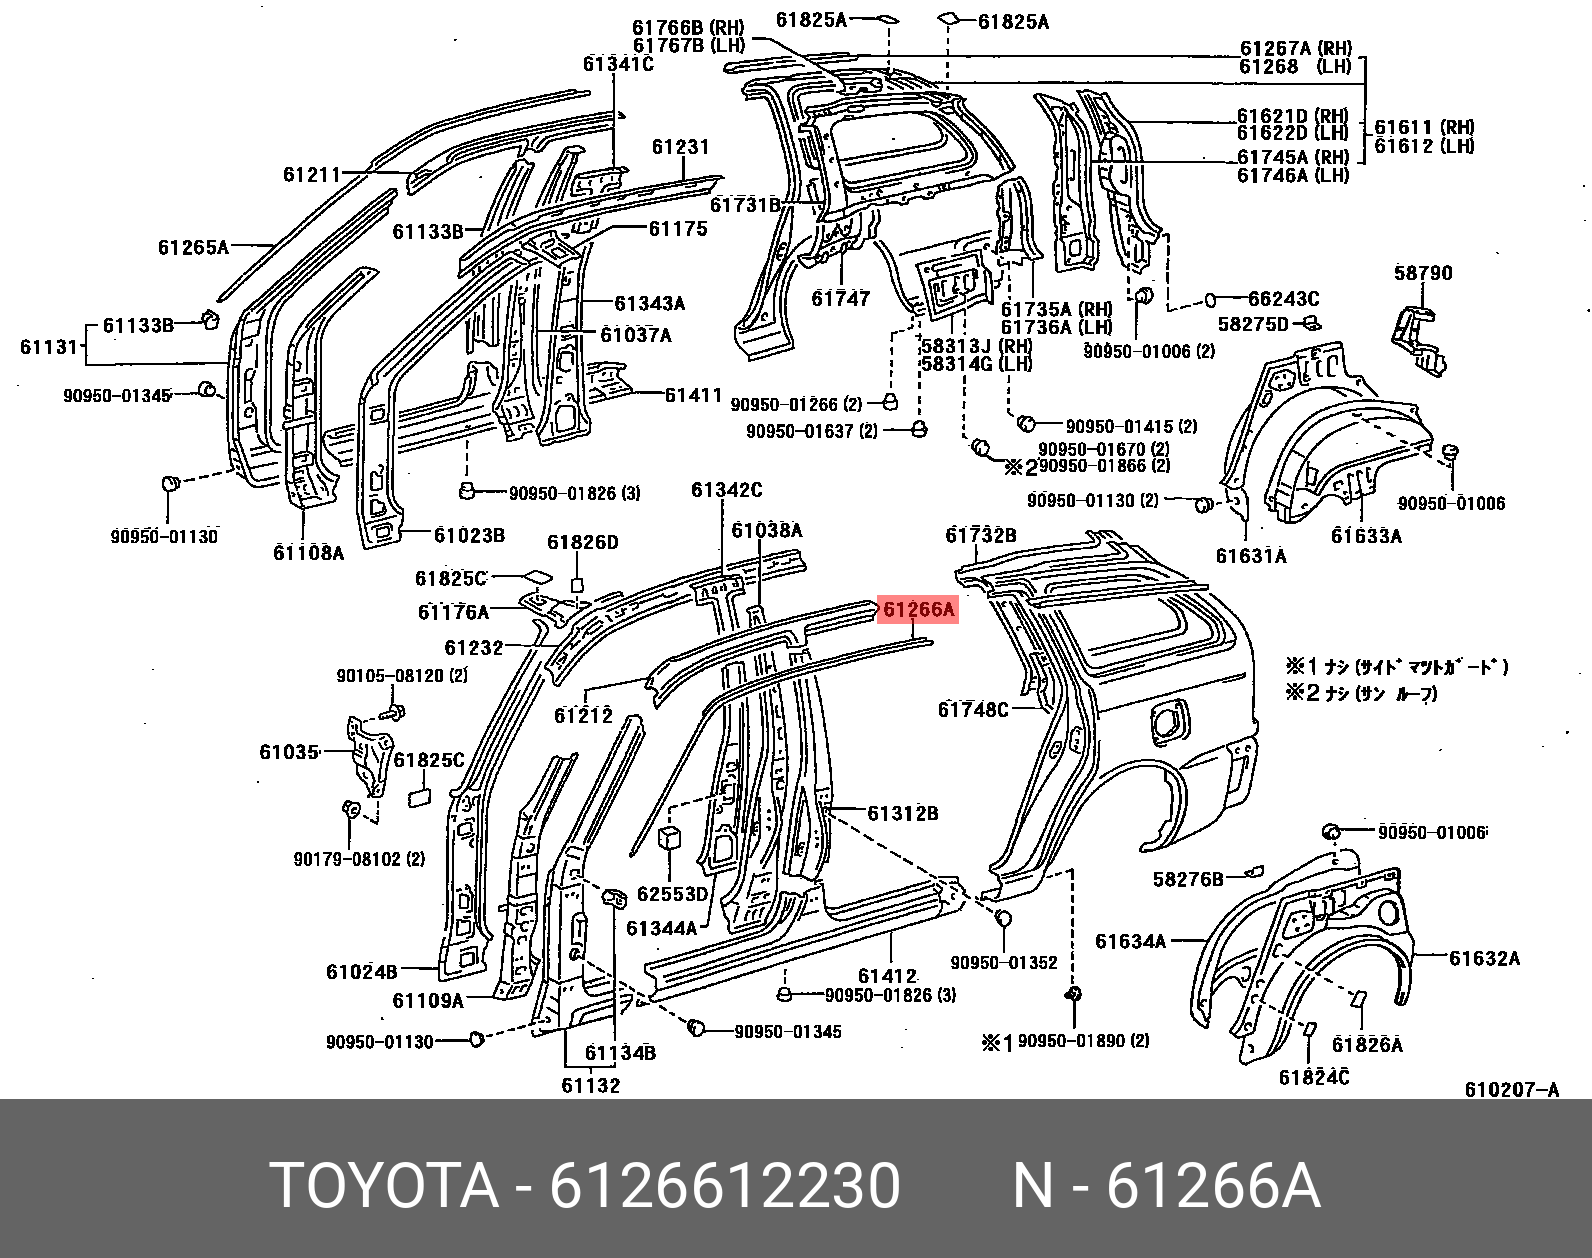 COROLLA 199505 - 200008, CHANNEL, ROOF DRIP SIDE, CENTER LH